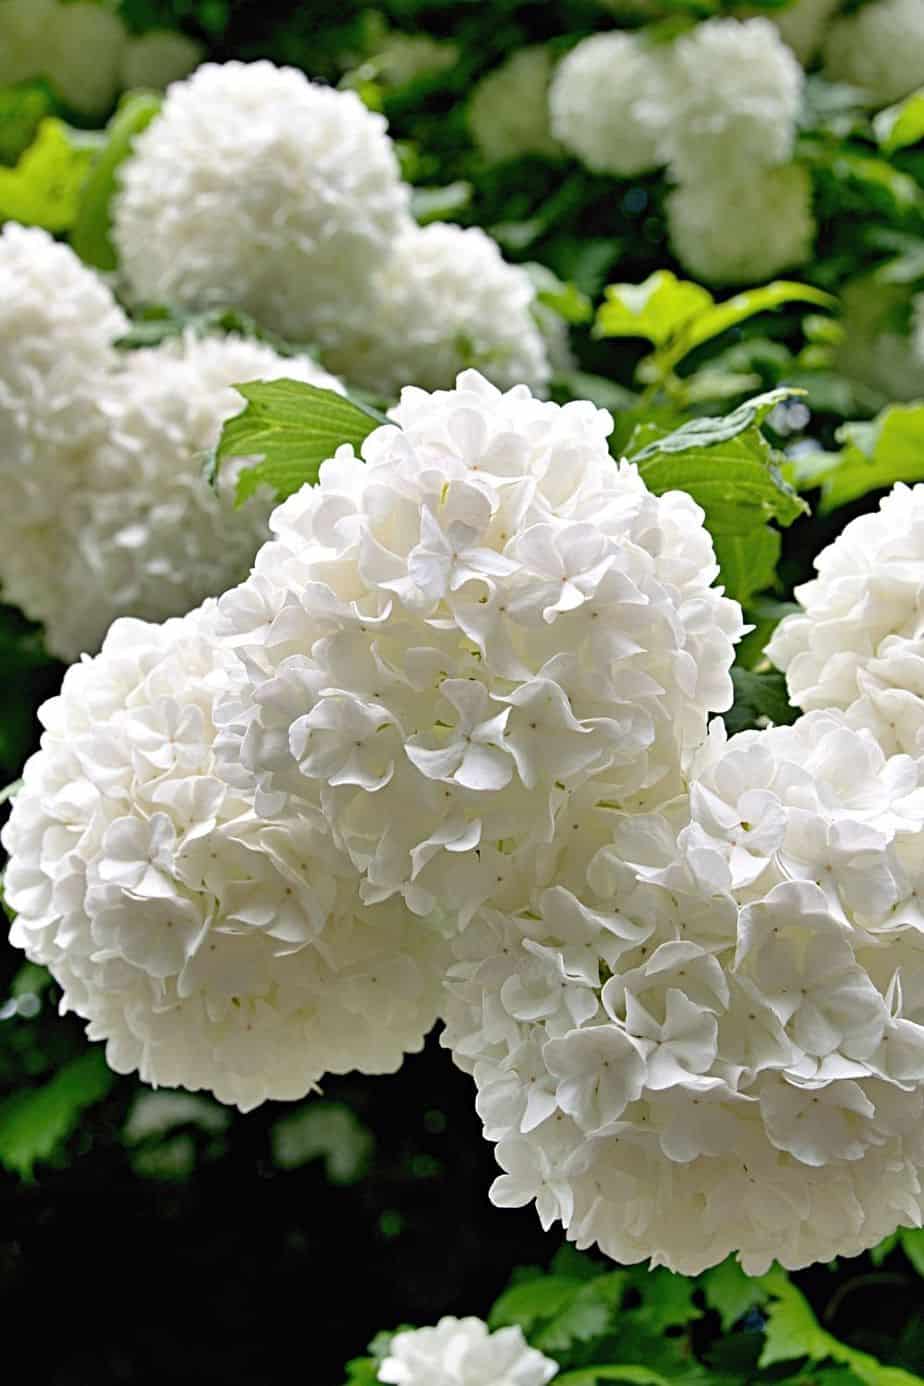 Viburnum, though they're more commonly grown in pots and placed in porches, is another great plant to grow for privacy